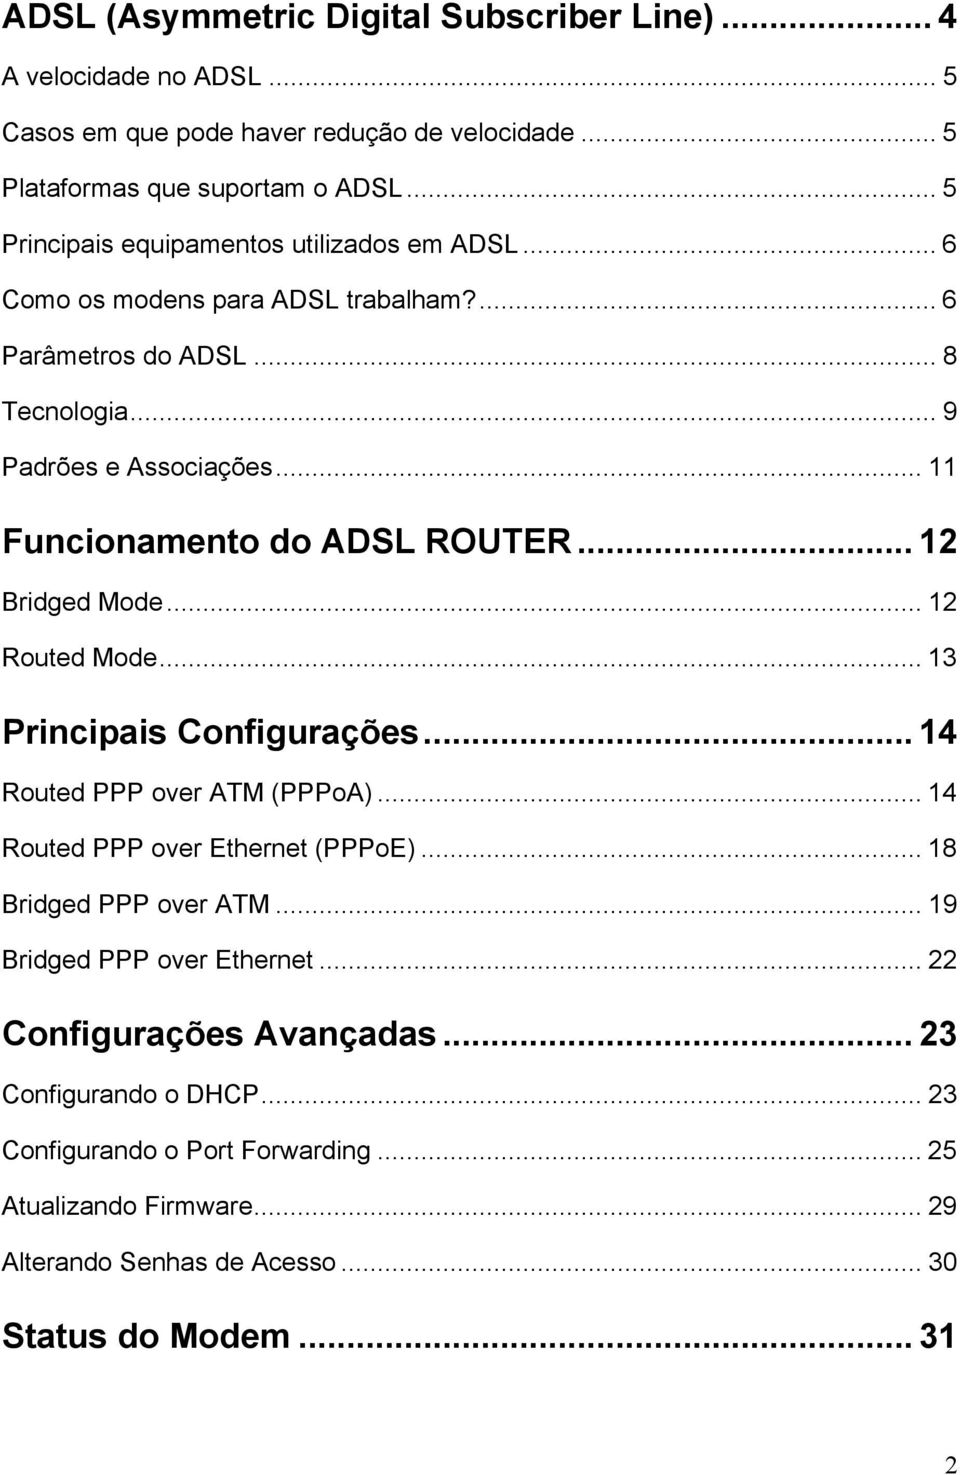 .. 11 Funcionamento do ADSL ROUTER... 12 Bridged Mode... 12 Routed Mode... 13 Principais Configurações... 14 Routed PPP over ATM (PPPoA)... 14 Routed PPP over Ethernet (PPPoE).